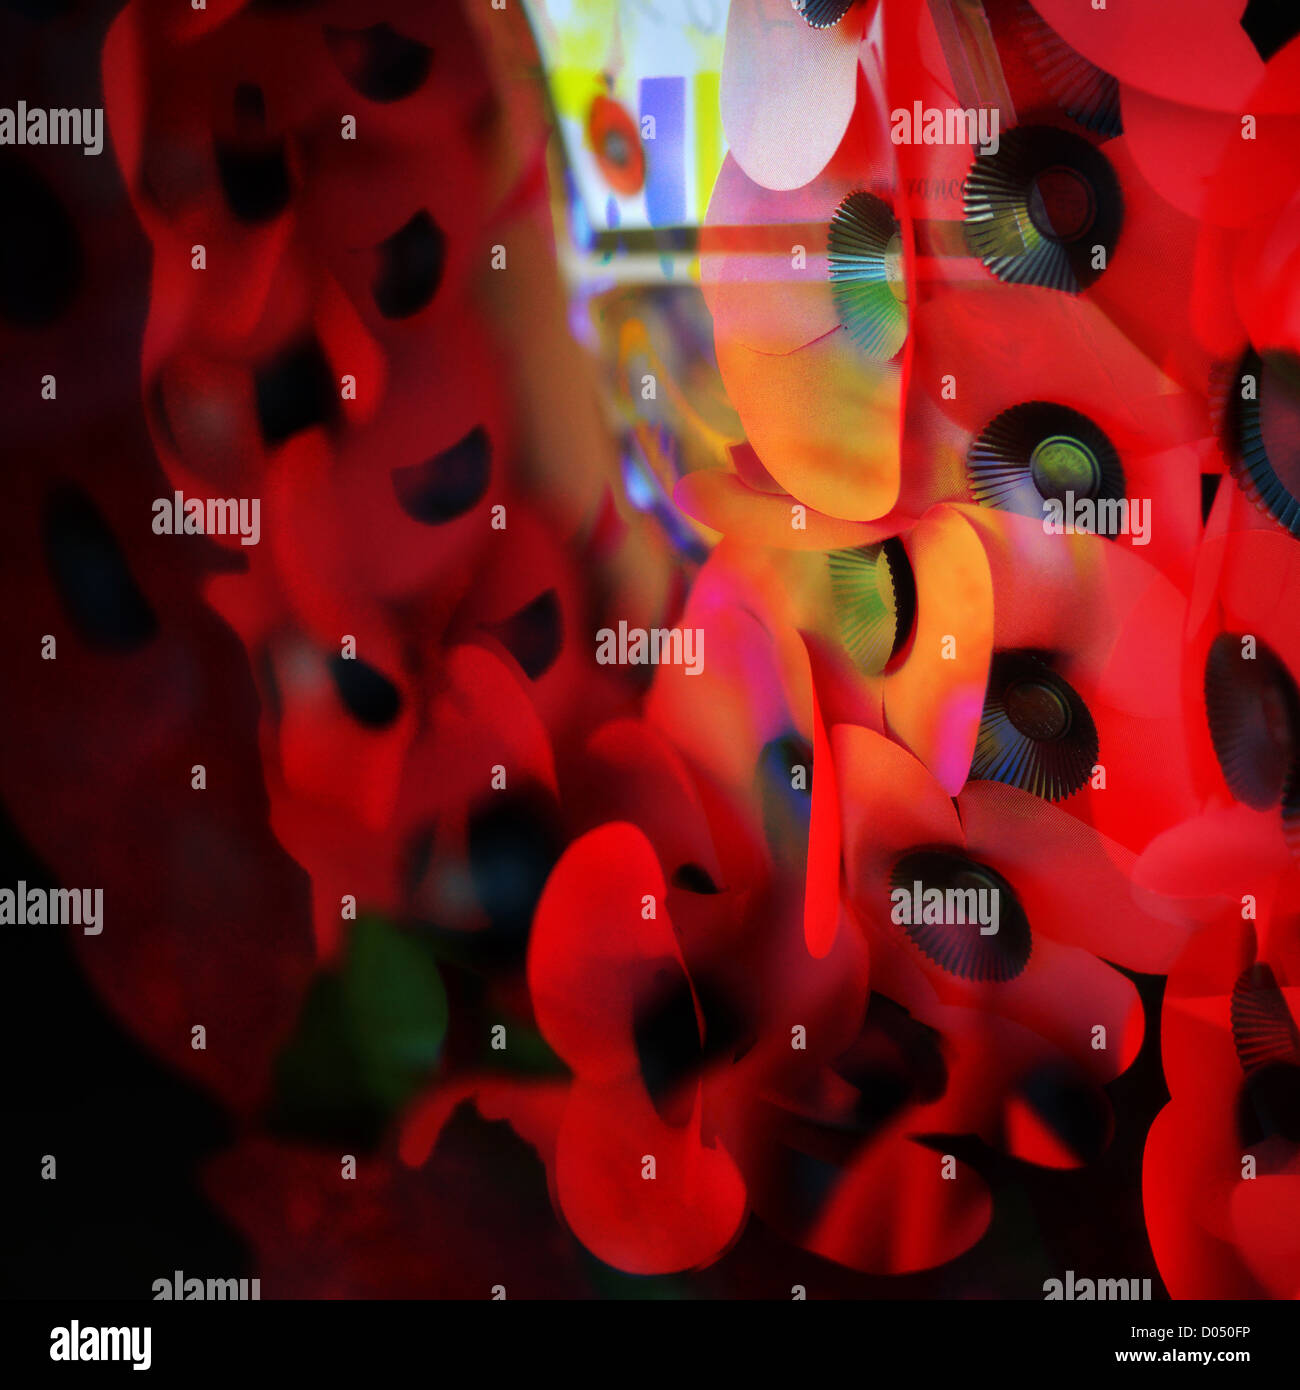 Remembrance Day Creative Montage Image of Poppy wreaths 11 November 2012 Stock Photo